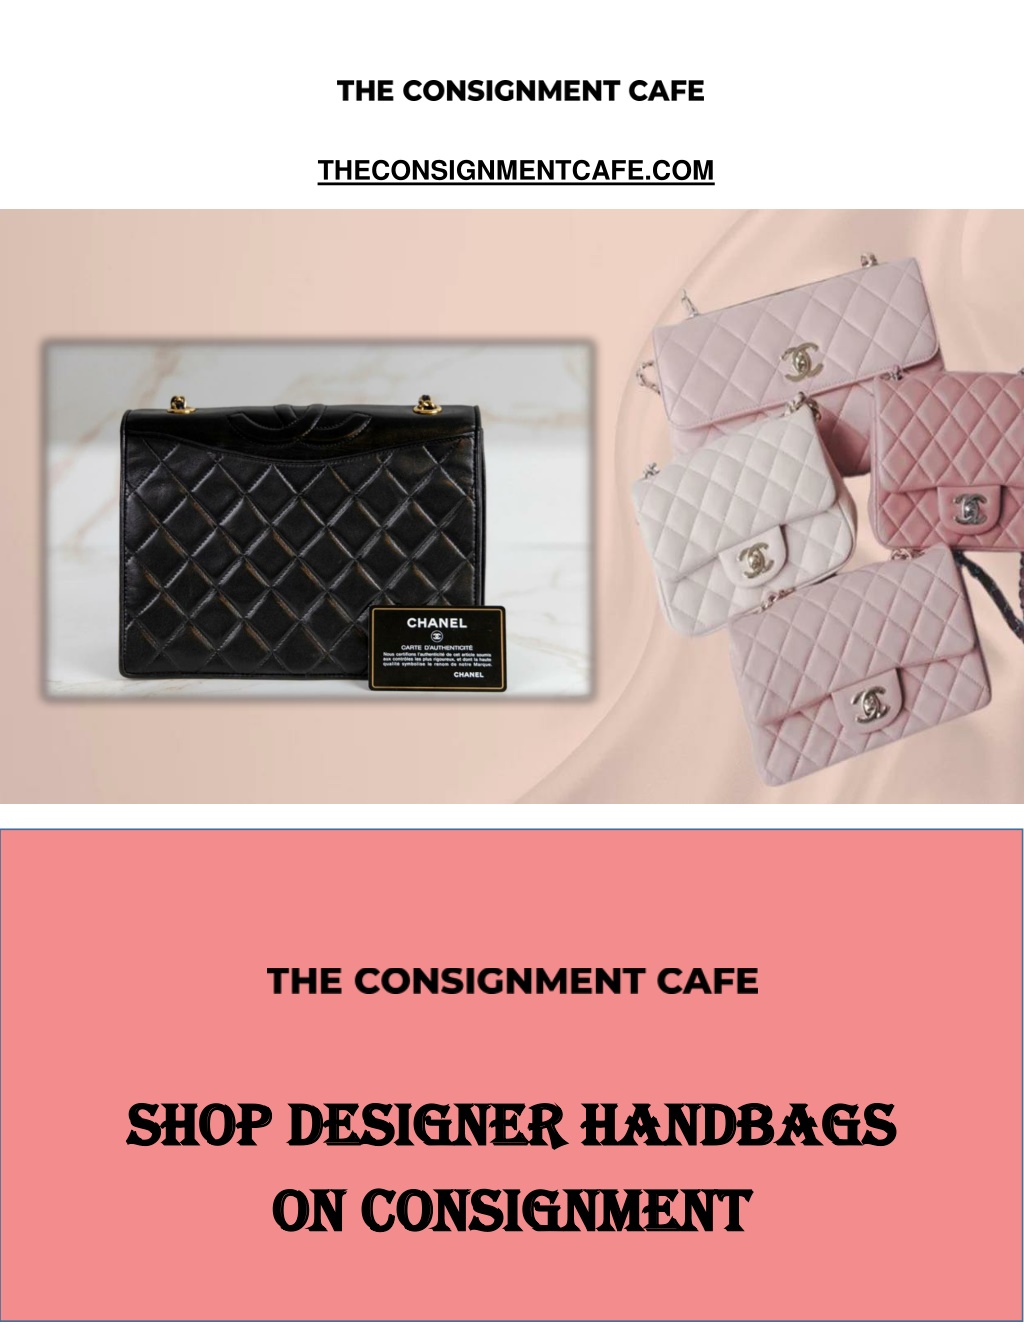 PPT - Consignment Louis Vuitton Bags and Designer Tote Bags for Sale at The  Consignment Cafe PowerPoint Presentation - ID:12343592